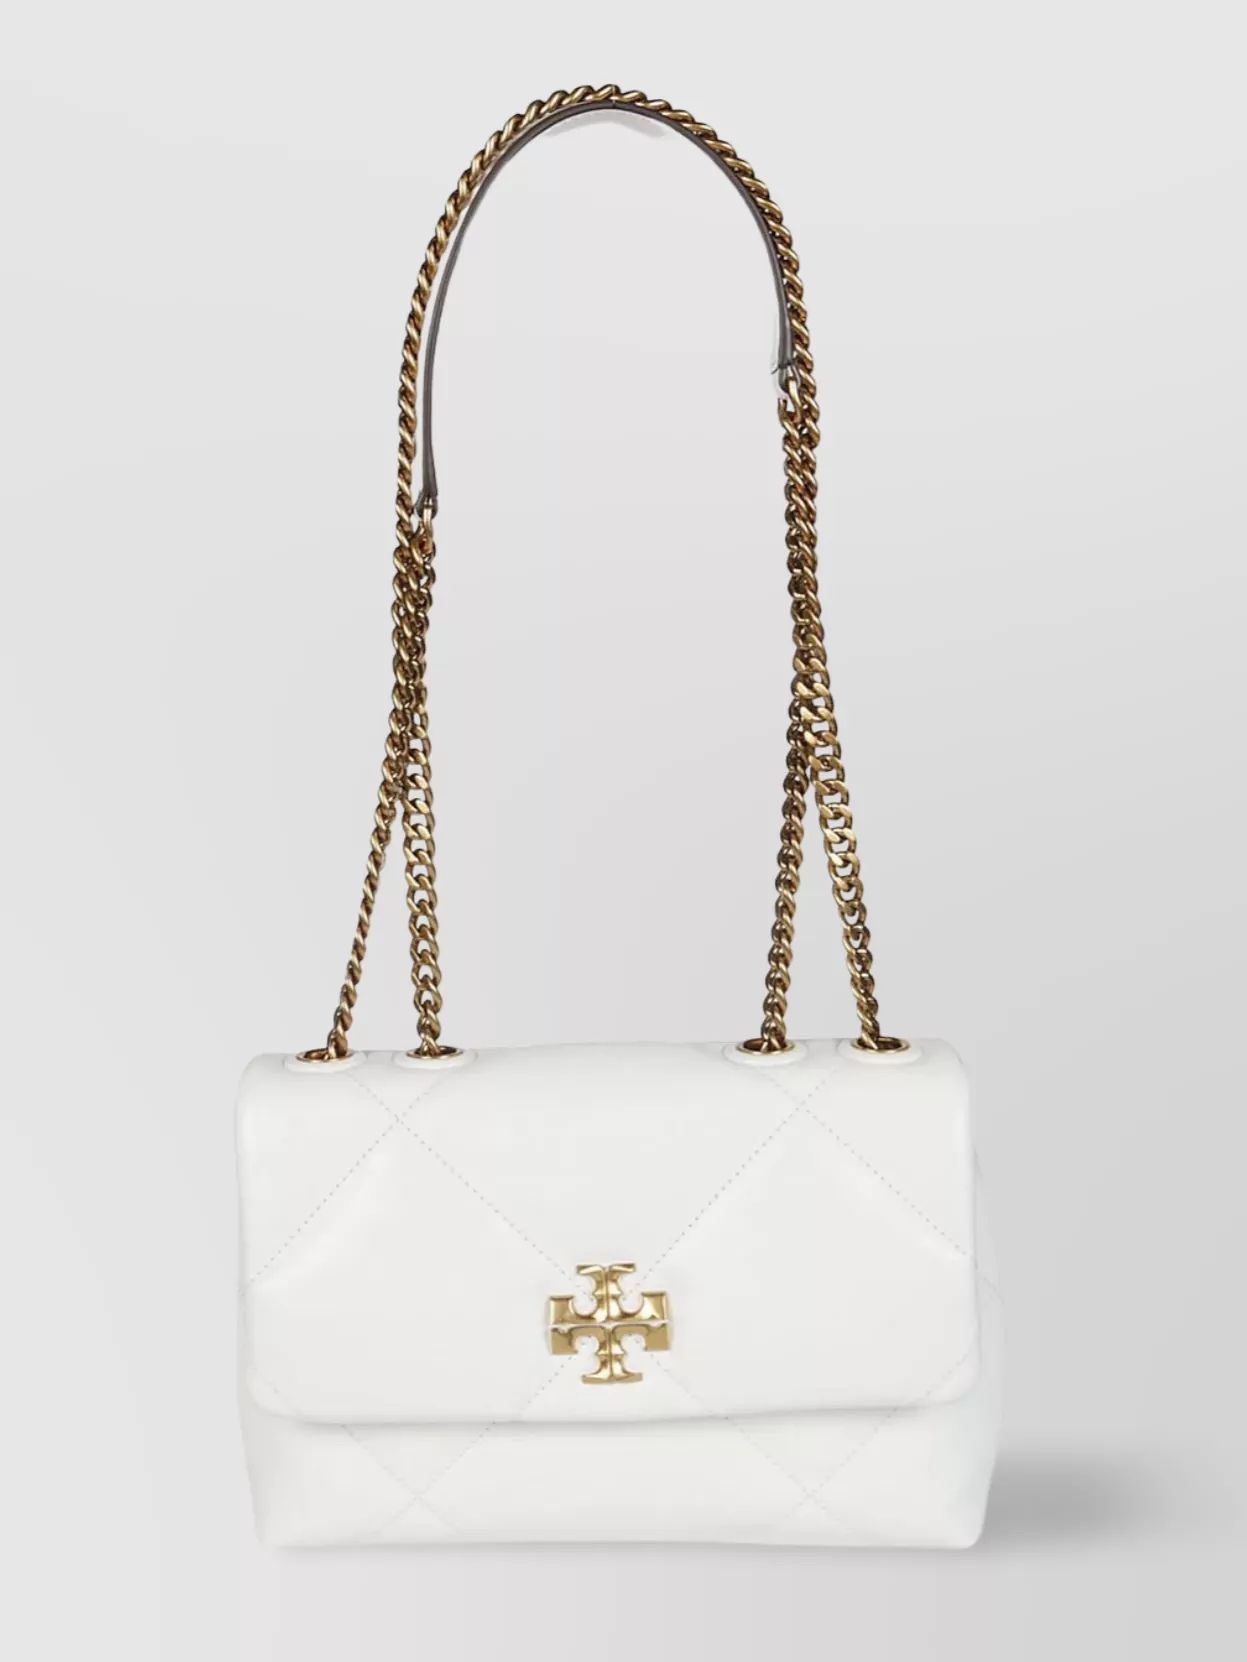 TORY BURCH SMALL QUILTED DIAMOND CHAIN SHOULDER BAG